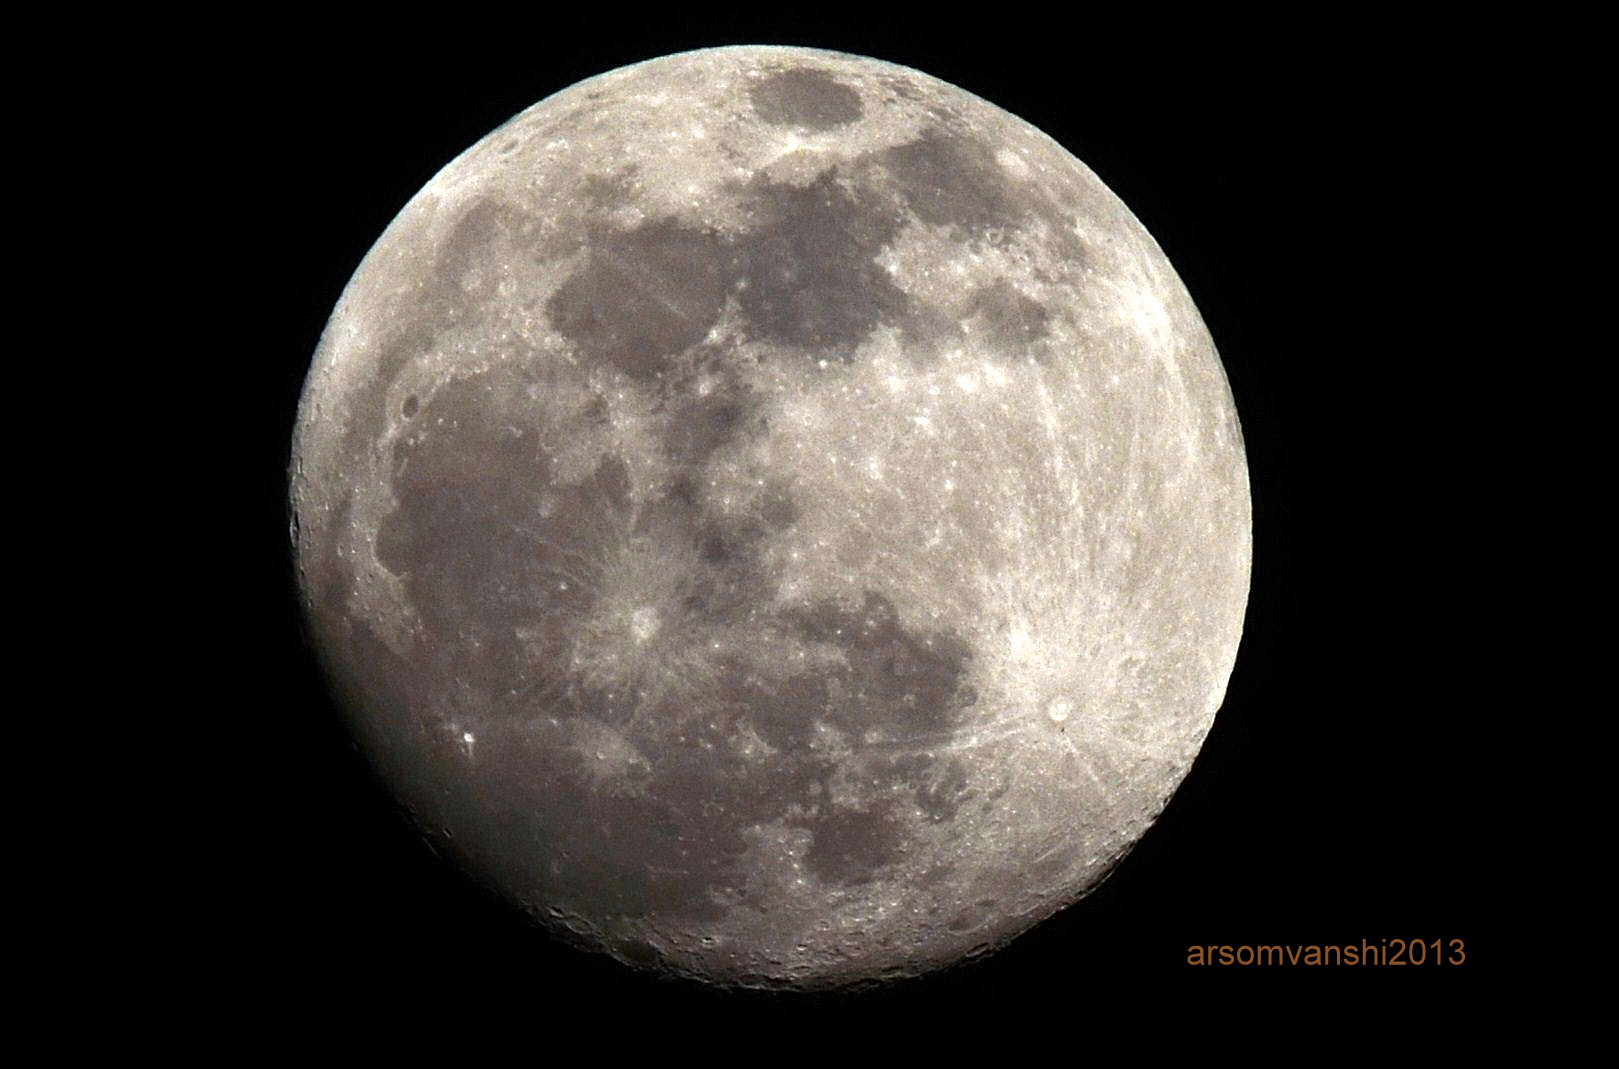 Title #Moon on May 23, 2013